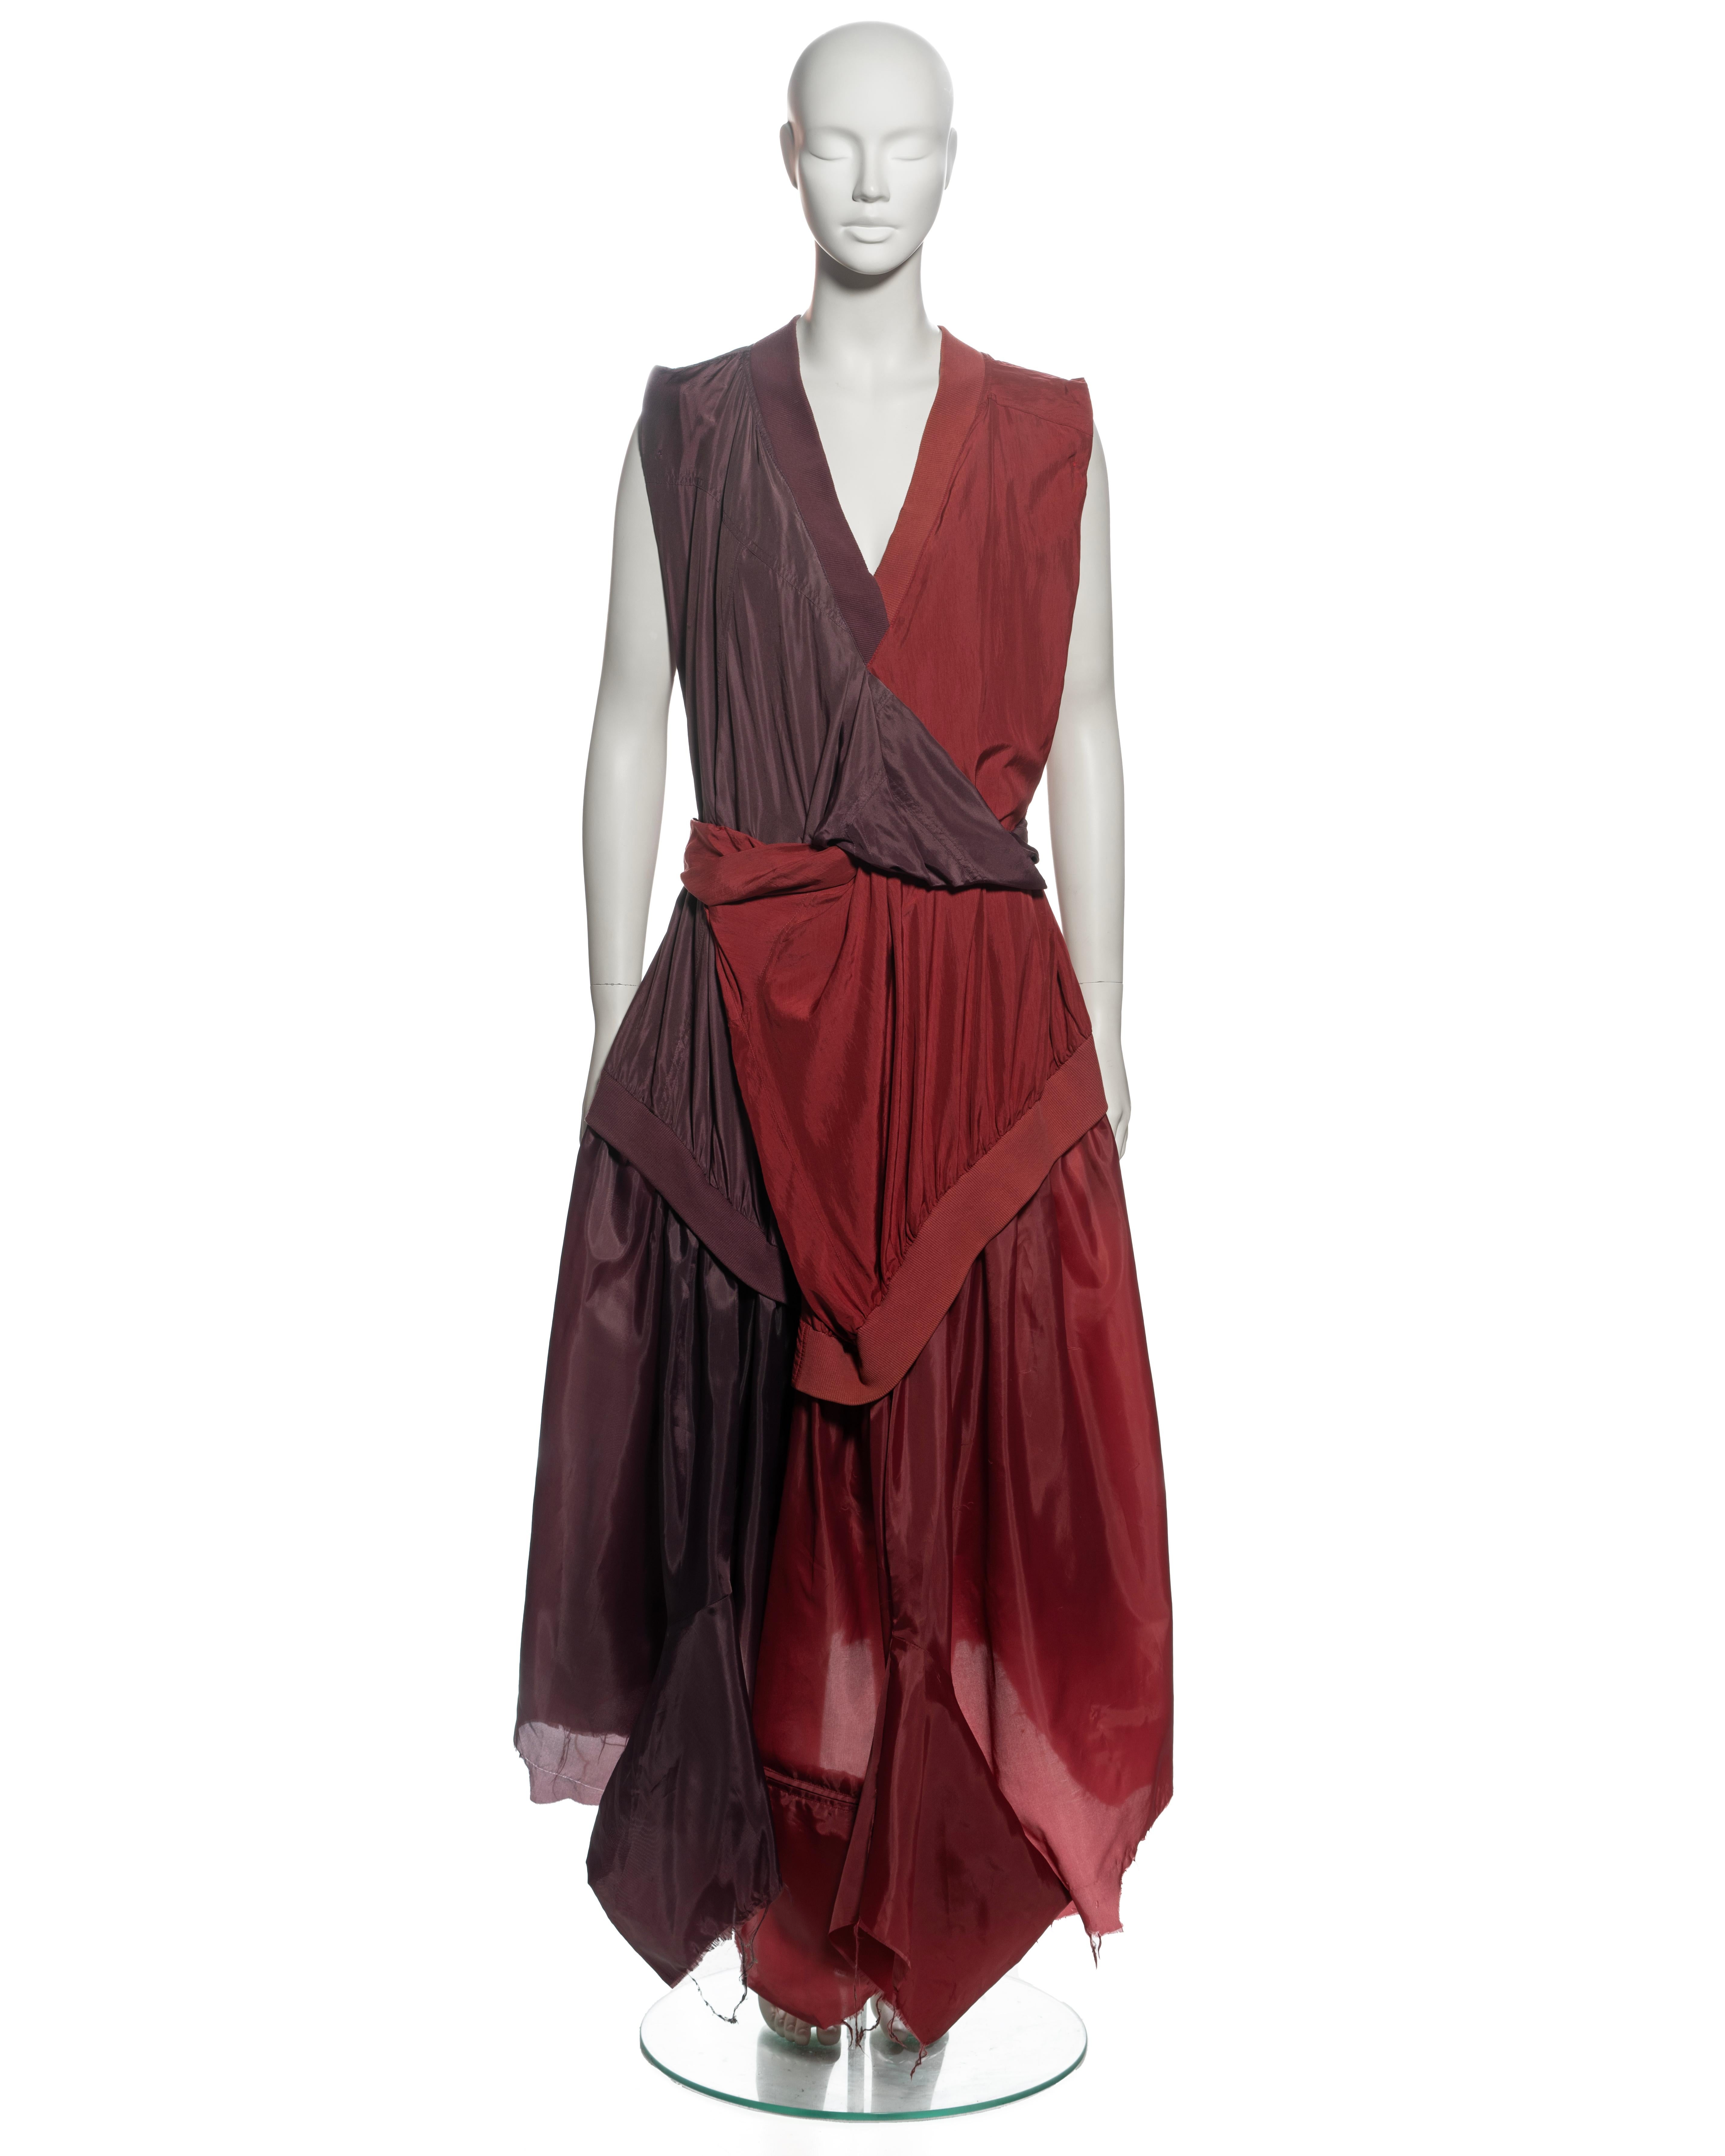 ▪ Archival Maison Martin Margiela Artisanal Dress
▪ Creative Director: Martin Margiela
▪ Fall-Winter 2004
▪ Sold by One of a Kind Archive
▪ Museum Grade
▪ Crafted from two vintage silk blouson jackets in rich burgundy and plum hues
▪ A fusion of the